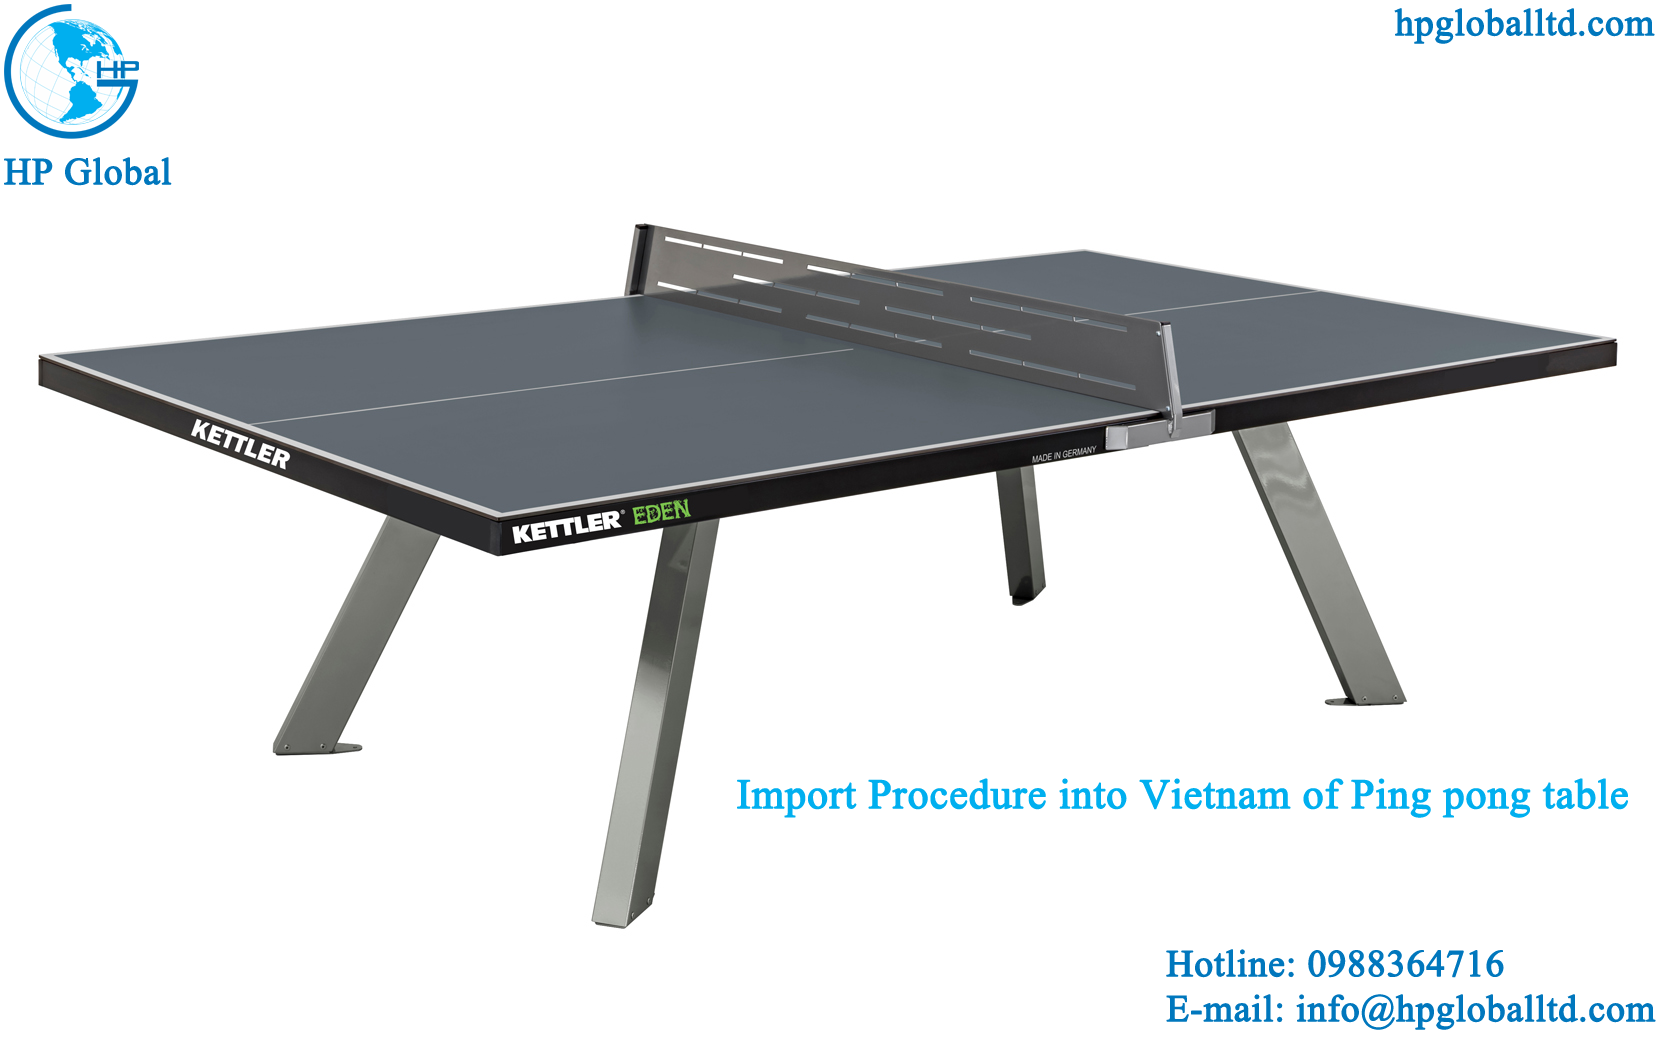 Import Procedure into Vietnam of Ping pong table